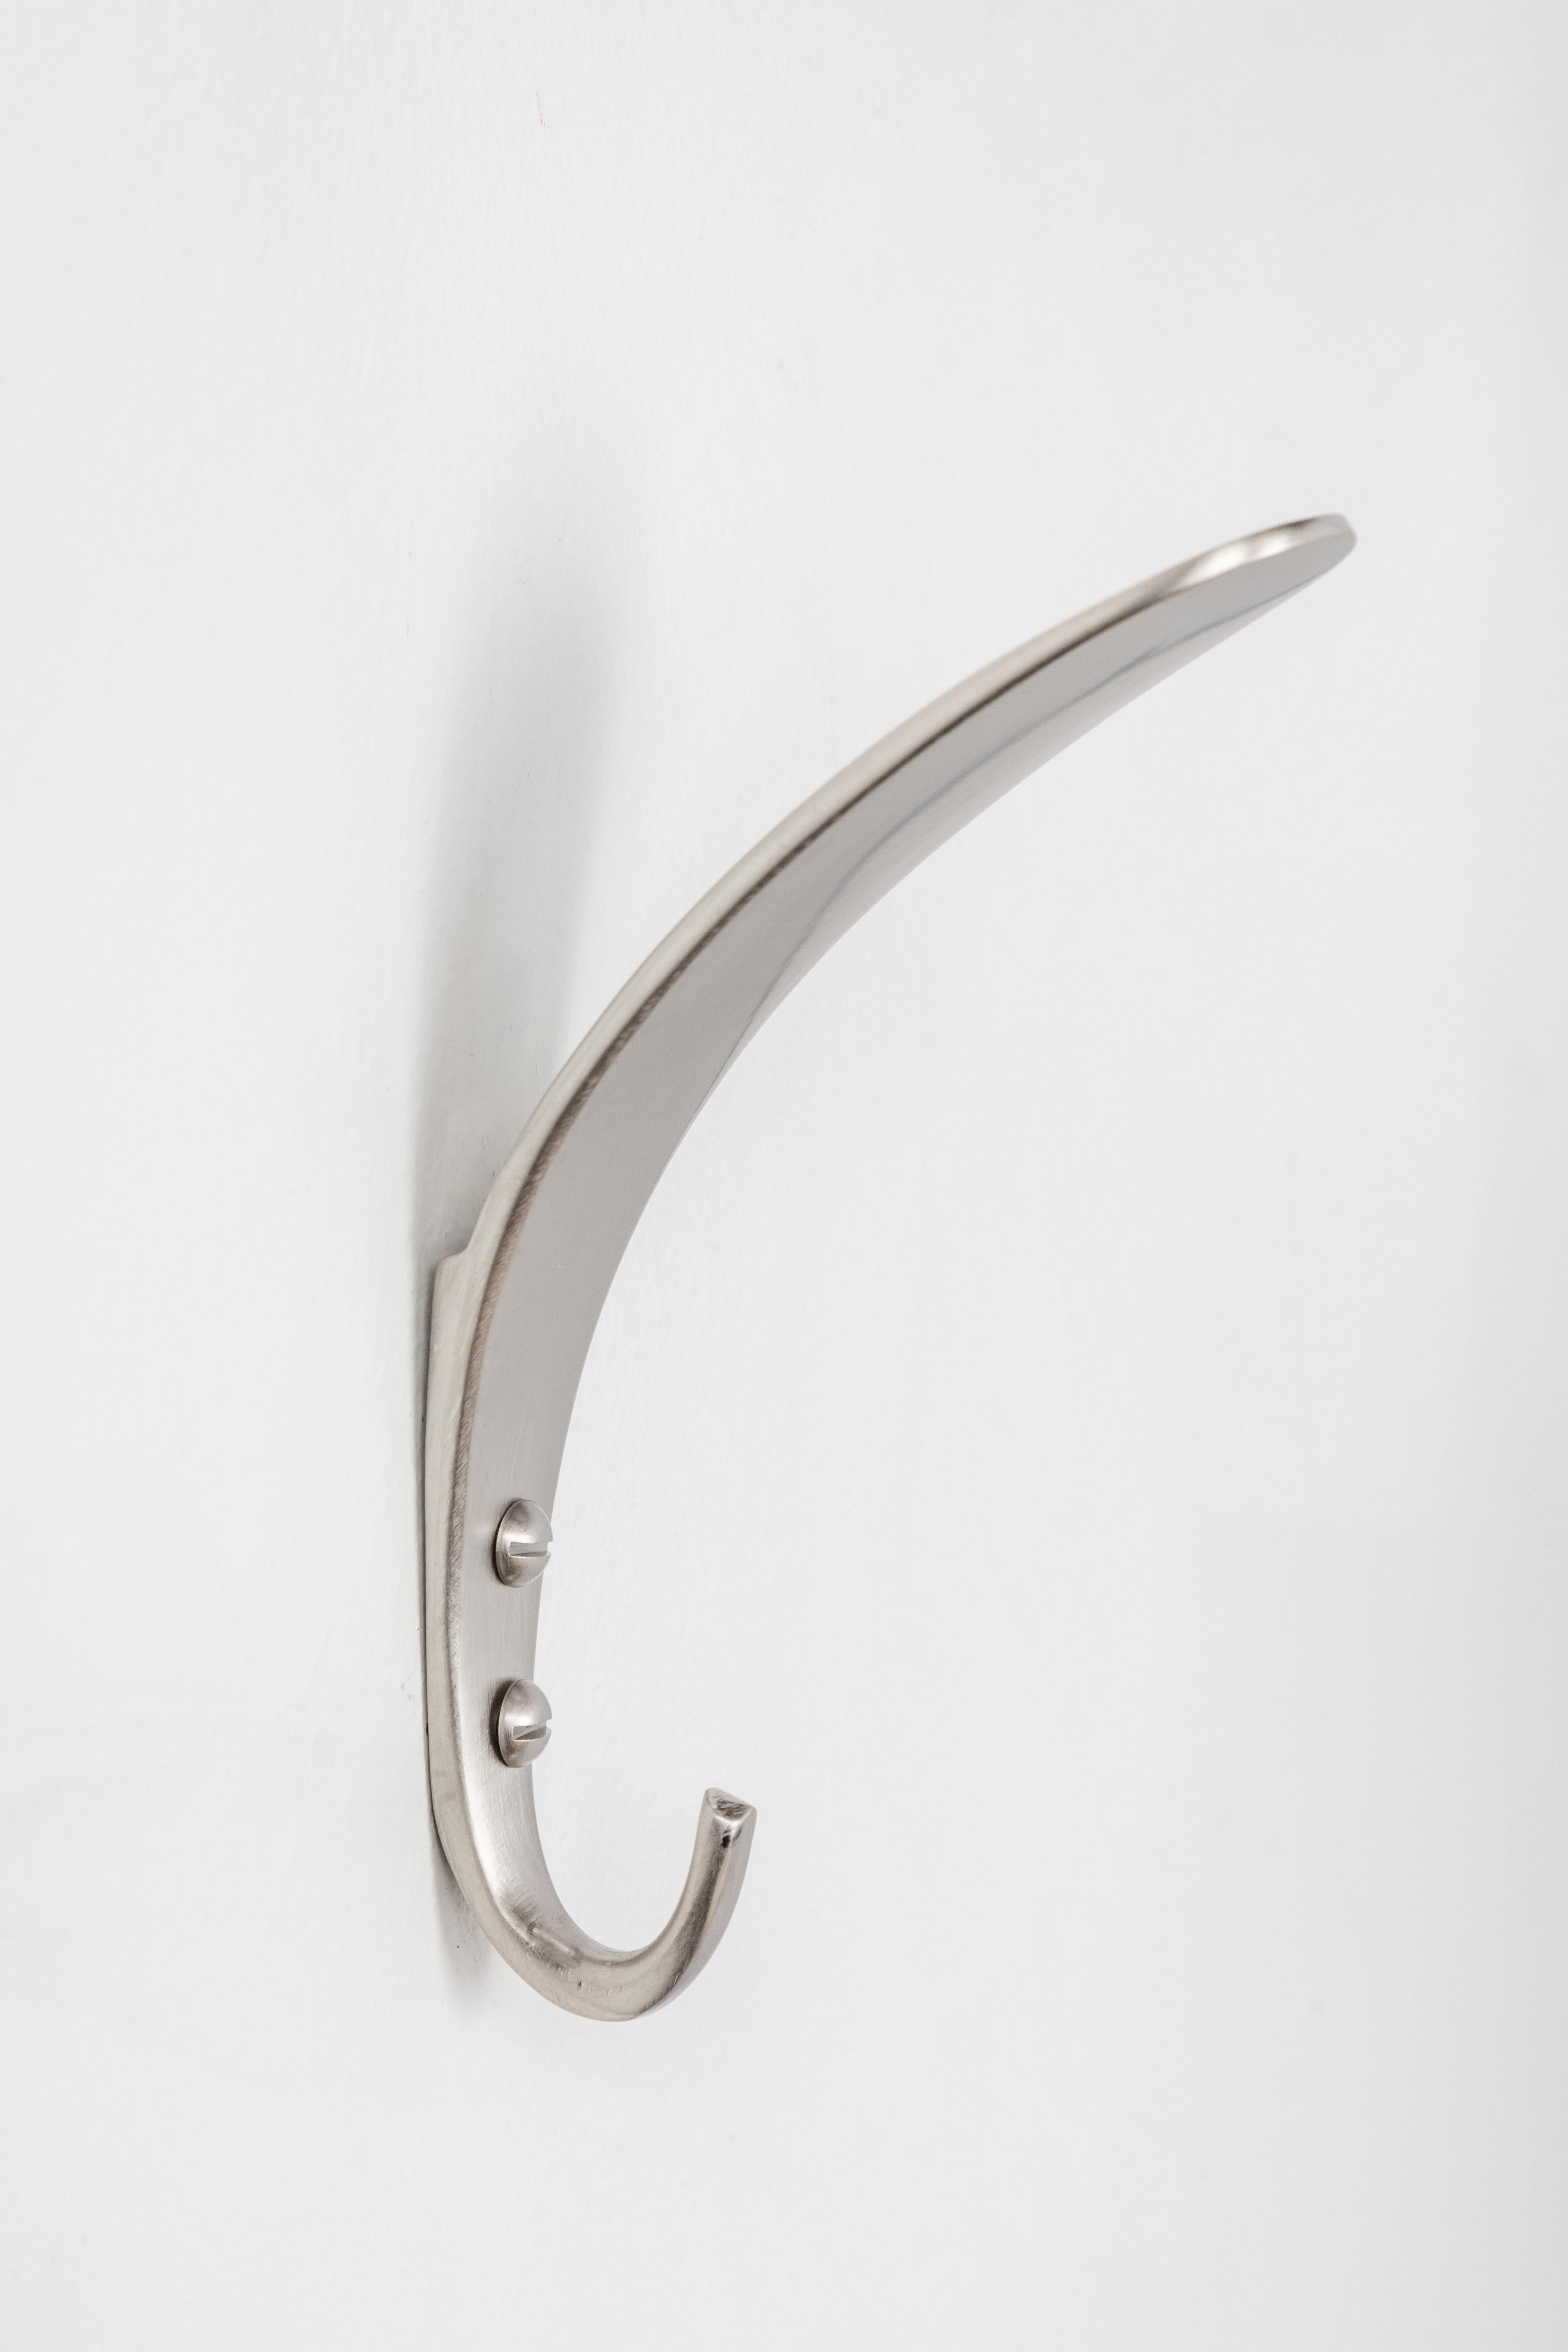 Carl Auböck Model #4327 Nickel-Plated Hook In New Condition For Sale In Glendale, CA